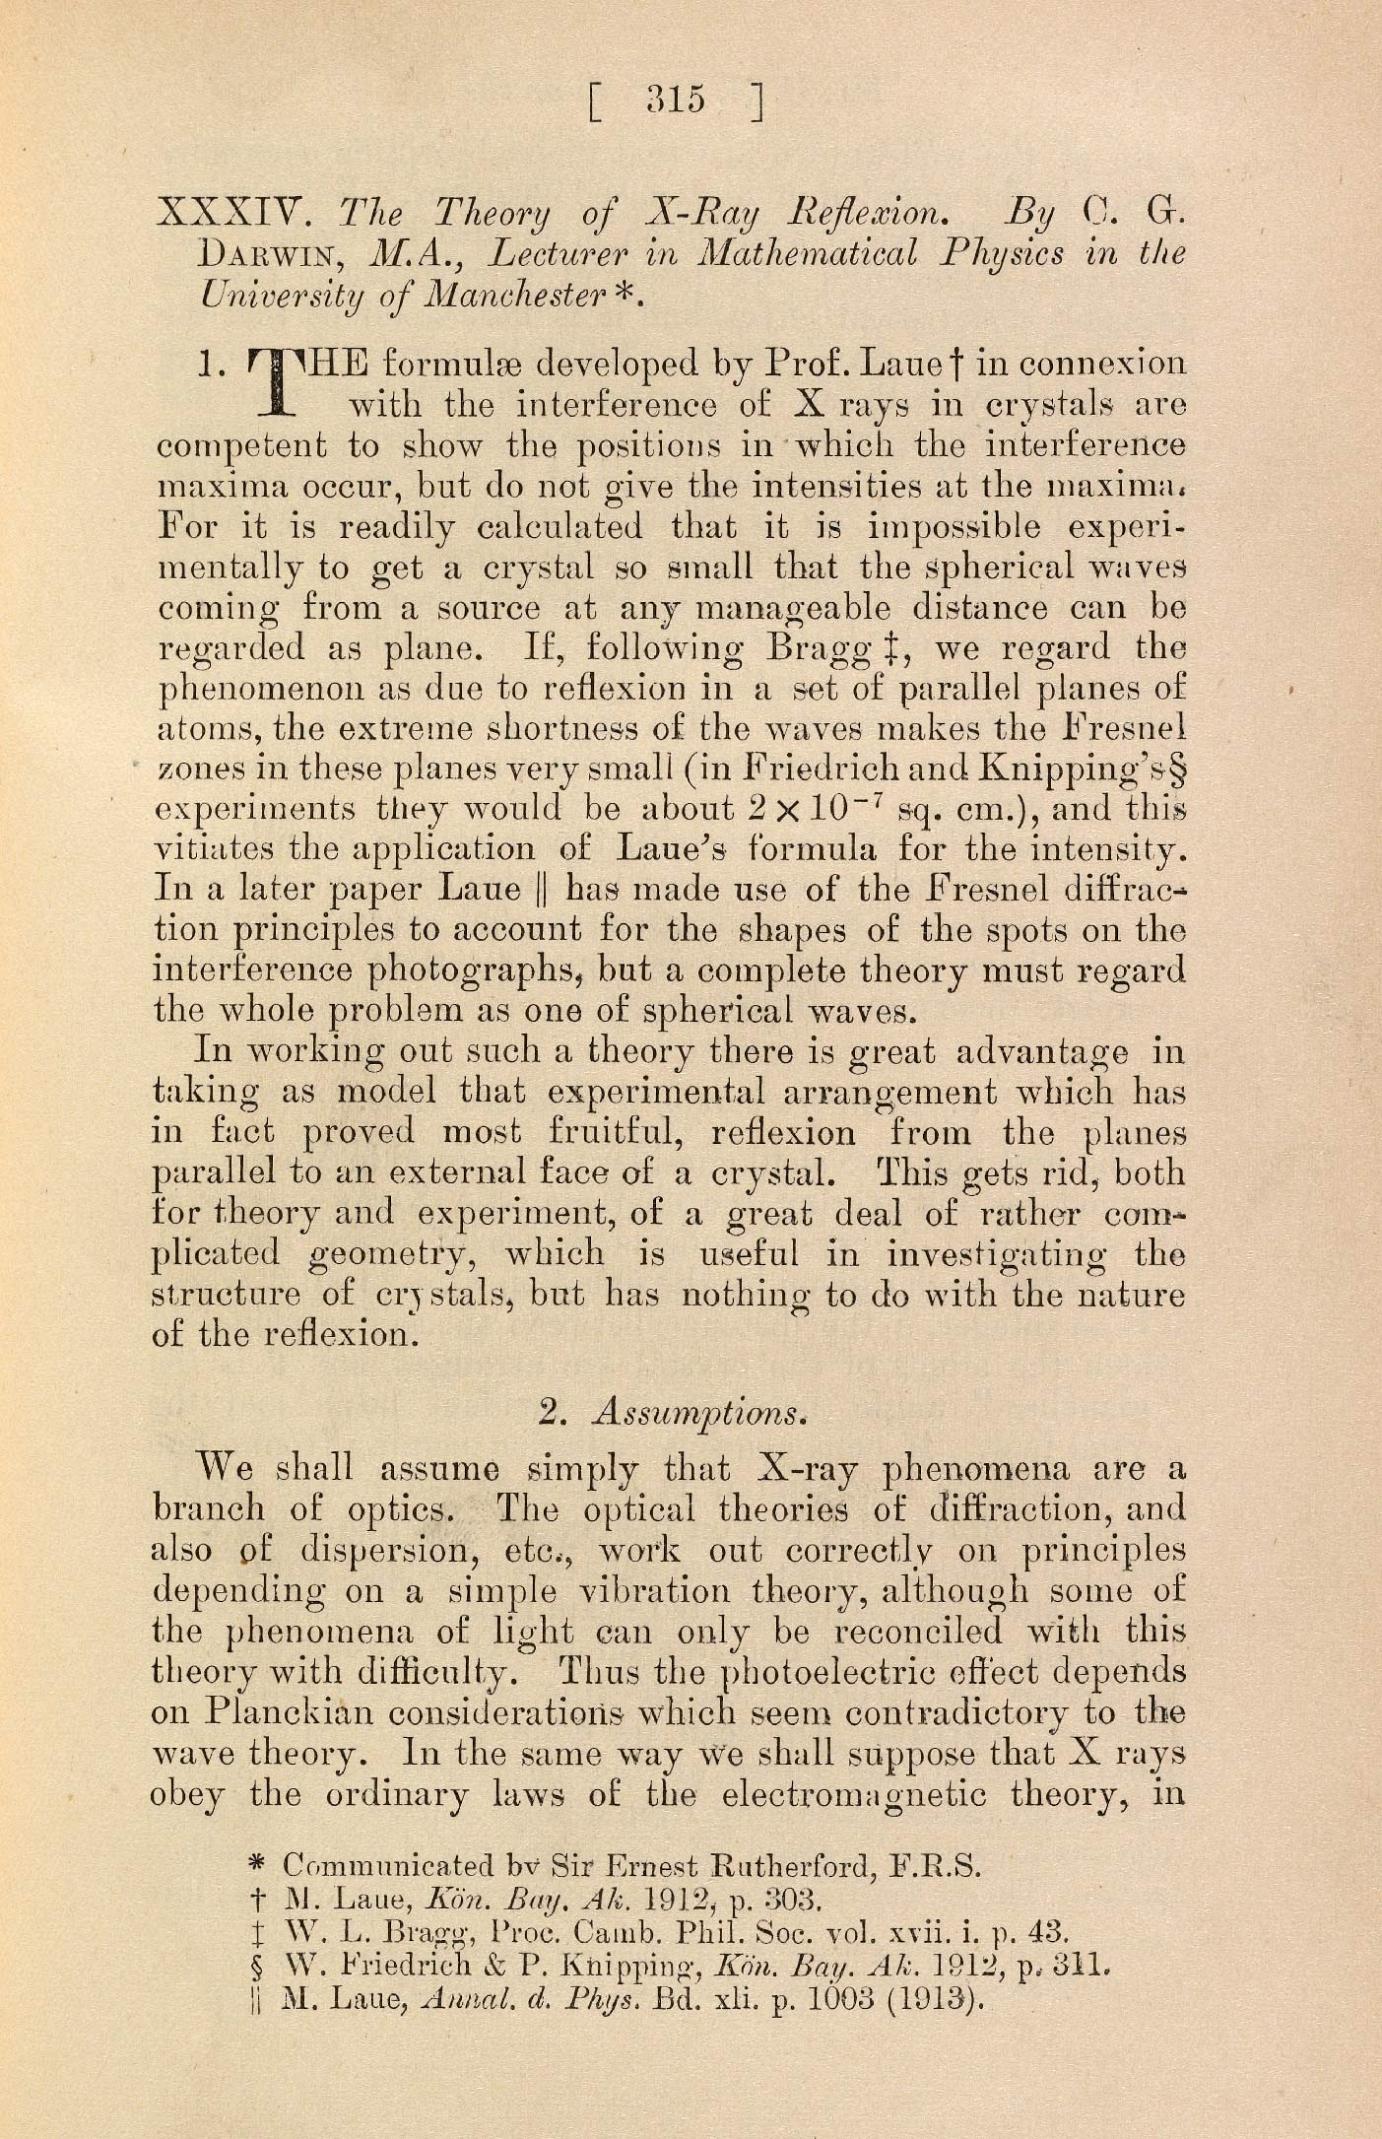 Image of page from Darwin article